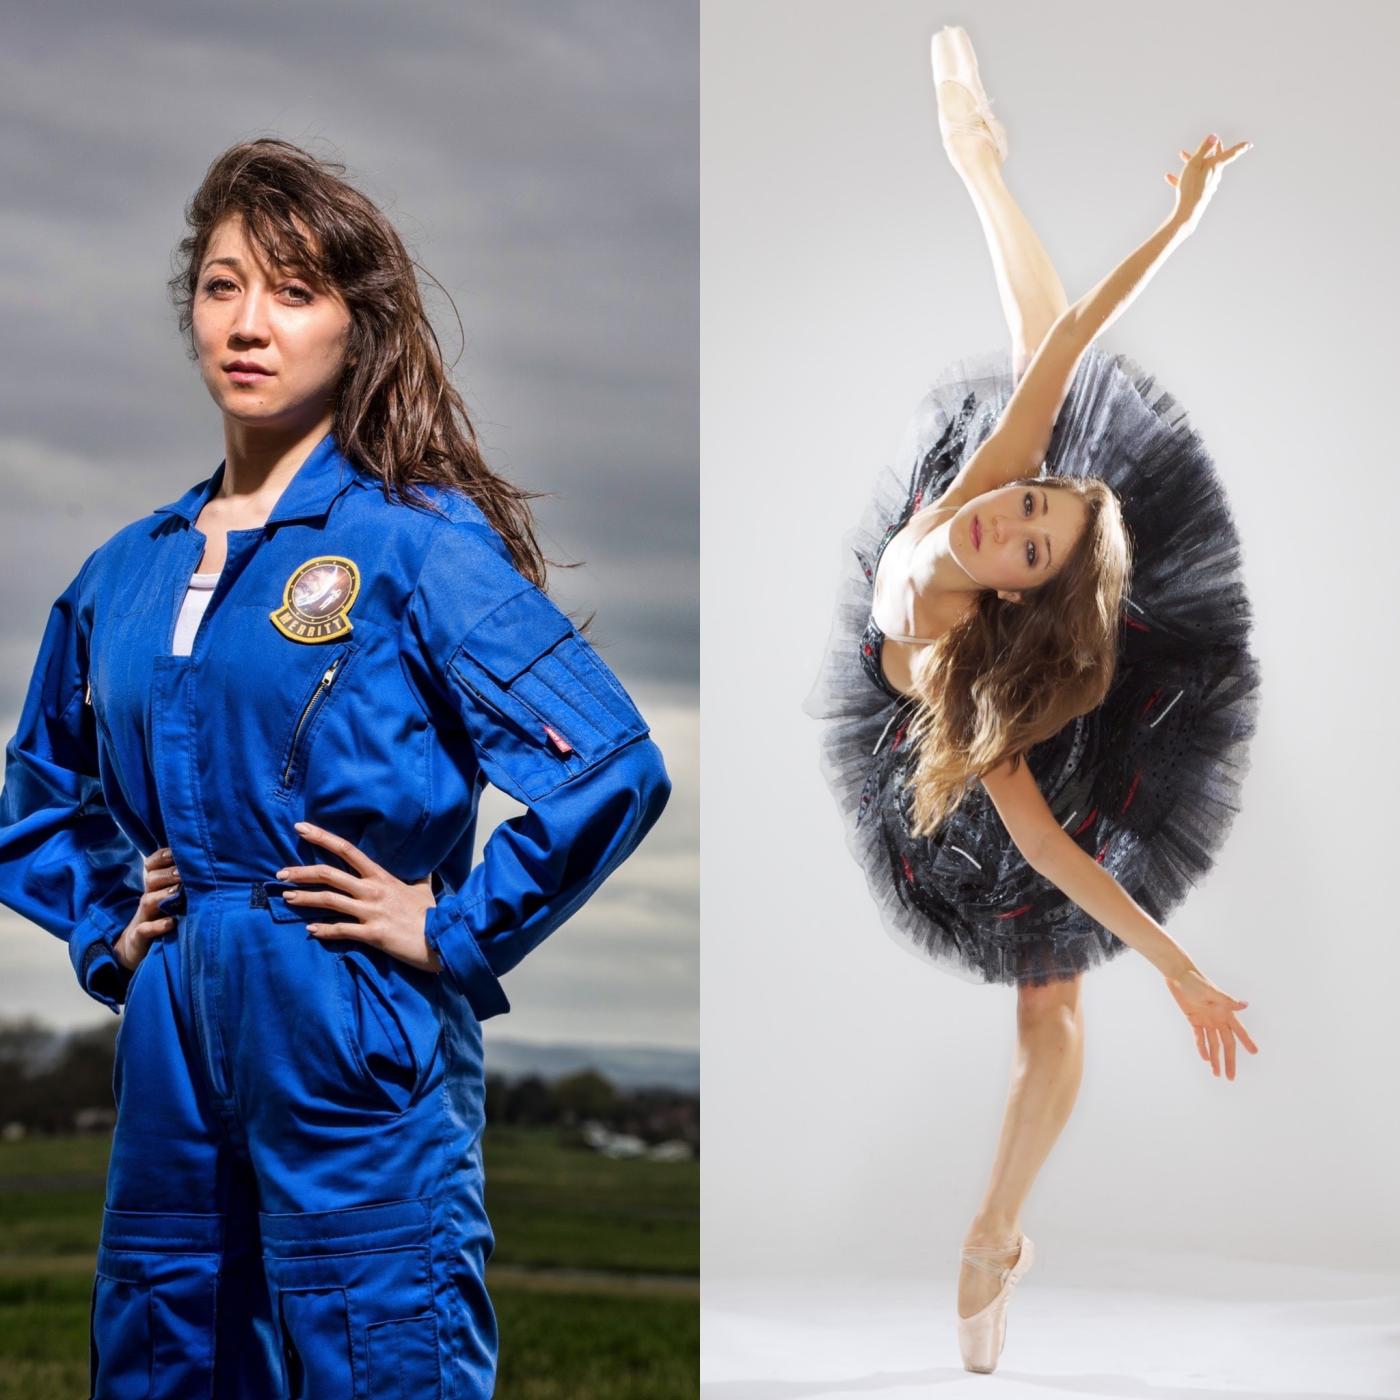 Collage: Merrit has her arms on her hips and wears a blue jumpsuit and Merrit is in a ballerina skirt and point shoes, with one leg up in the air over her body.